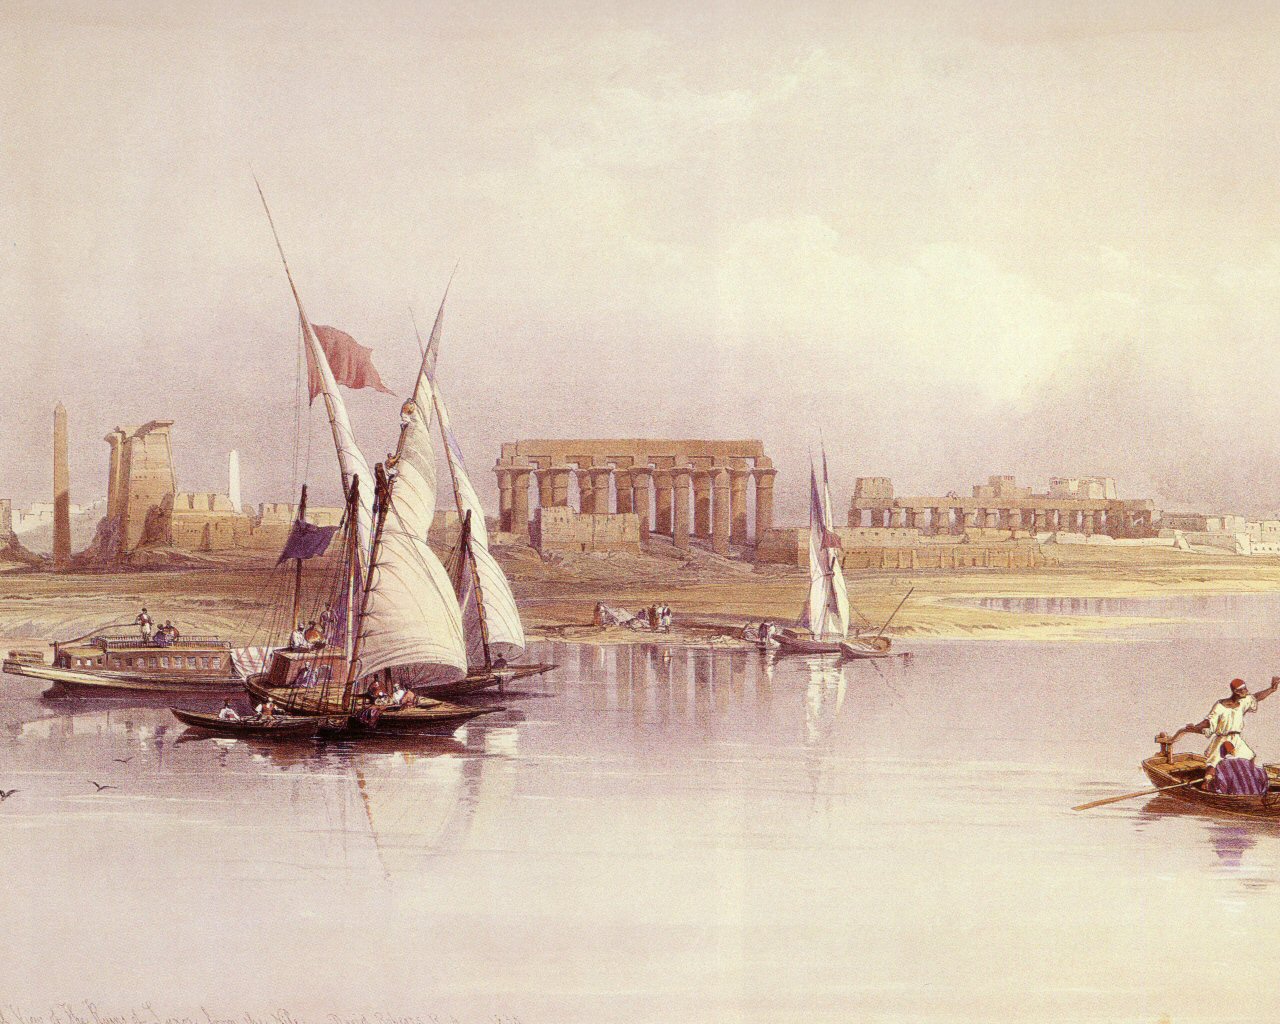 David_Roberts_16_The_Temple_Of_Luxor_As_Seen_From_The_Nile_1280x1024.jpg